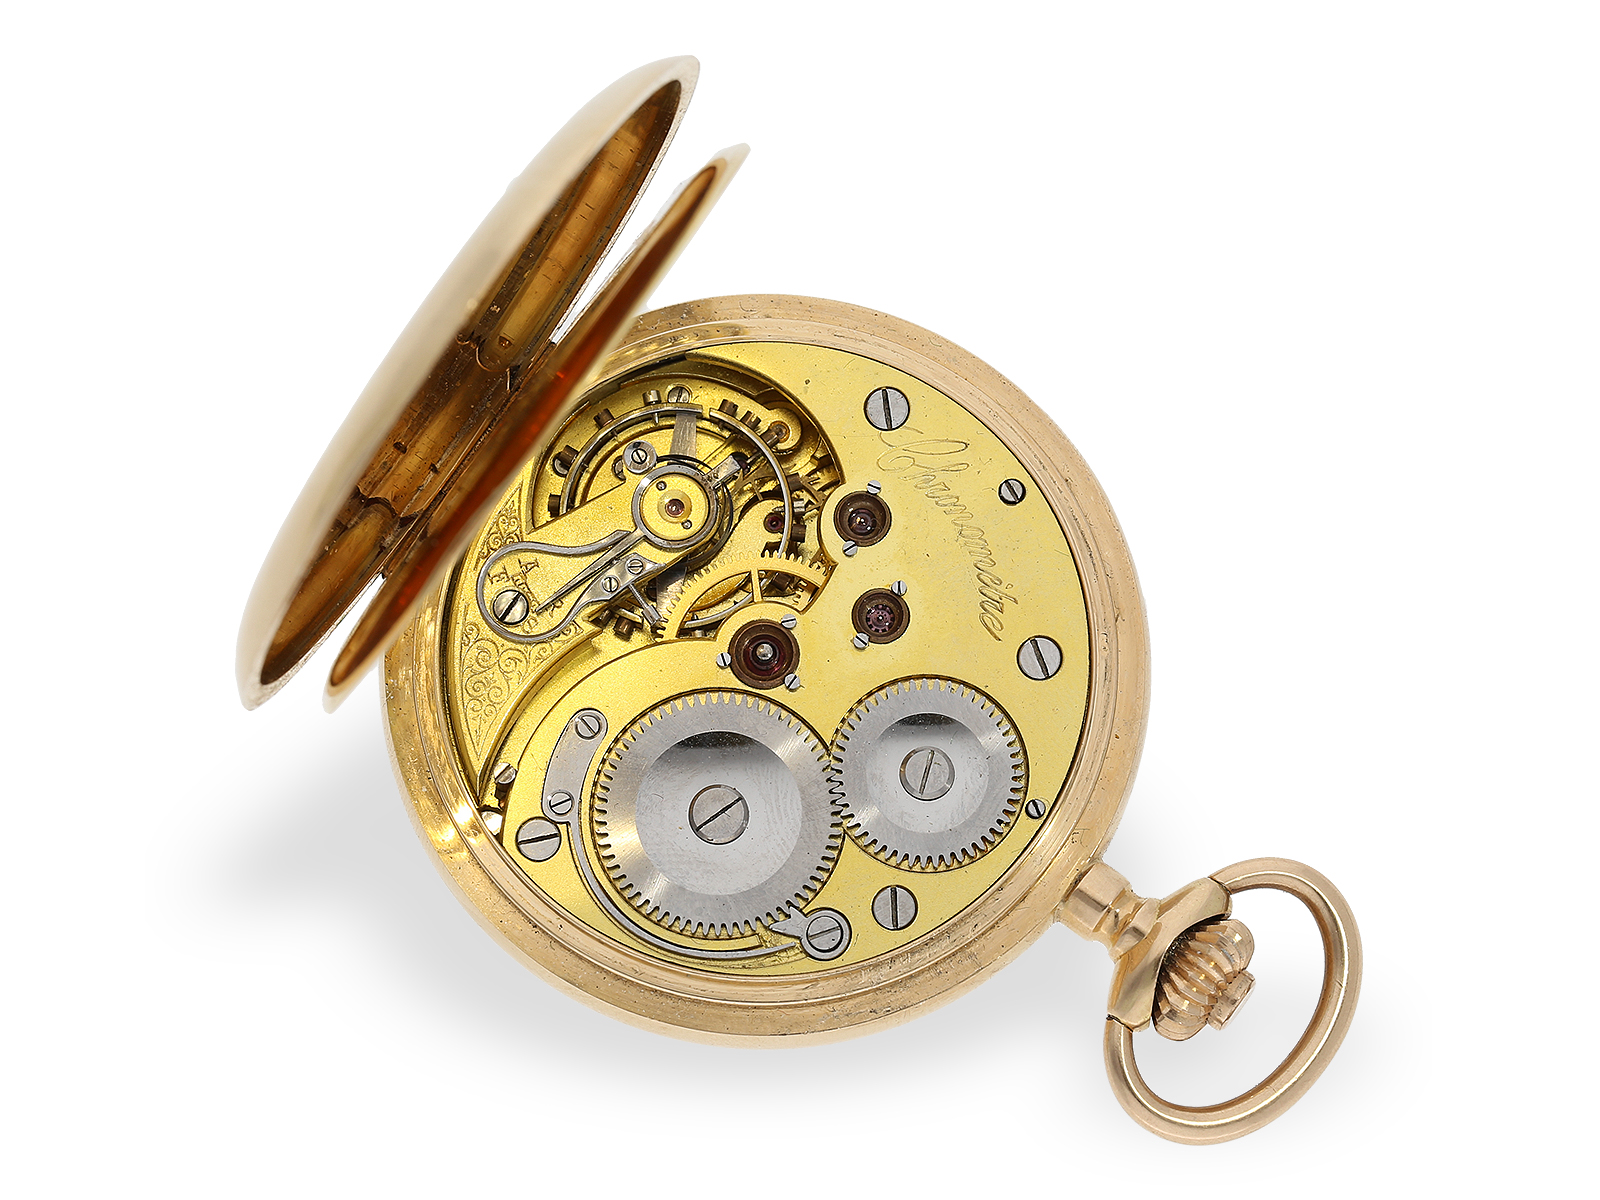 Very fine gold hunting case watch with chronometer escapement, "Chronometre Geneve", ca. 1900 - Image 2 of 8